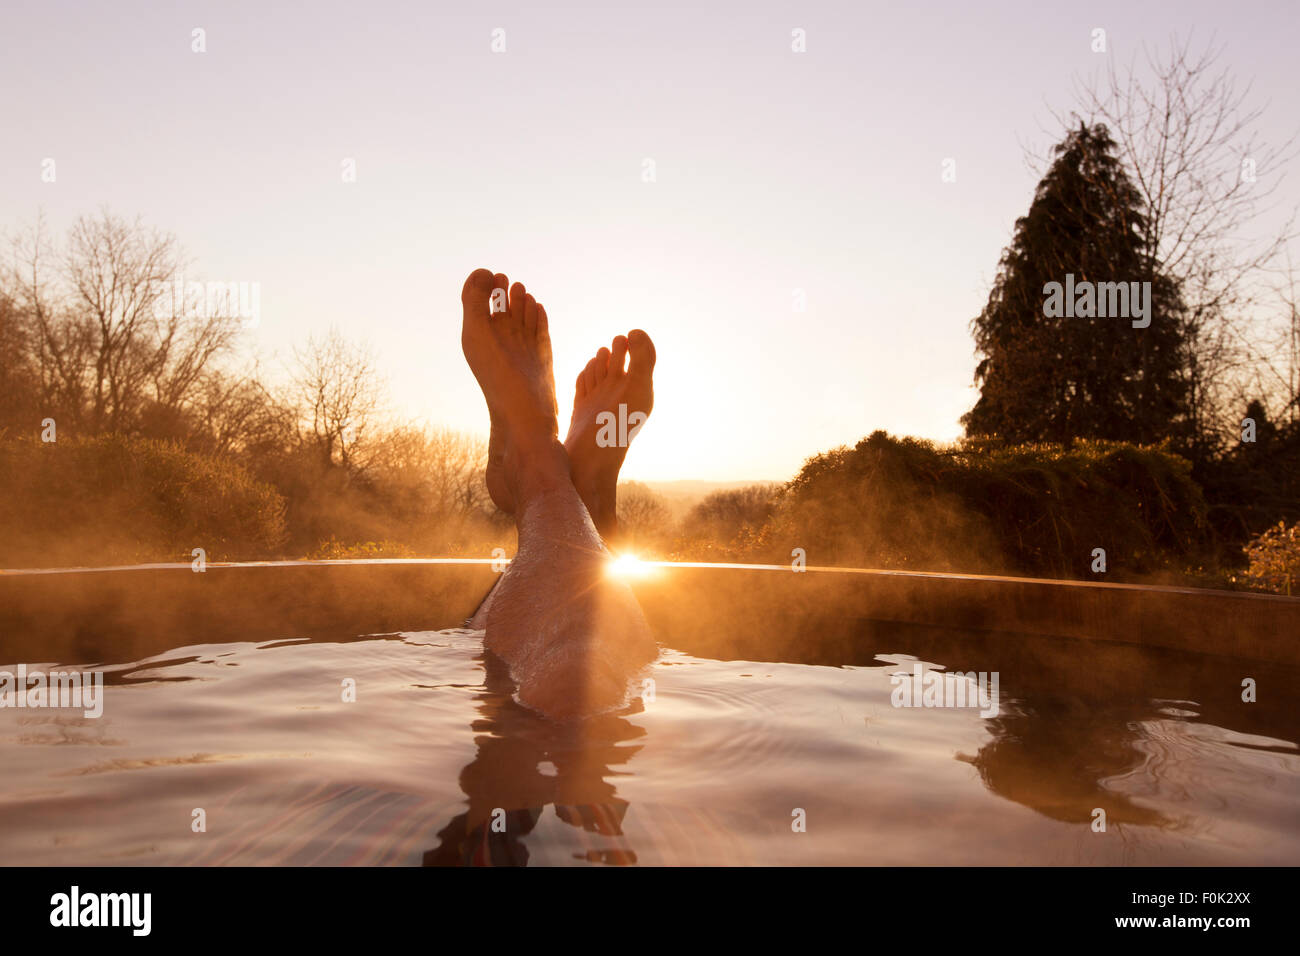 Man’s feet raised out of pool Stock Photo